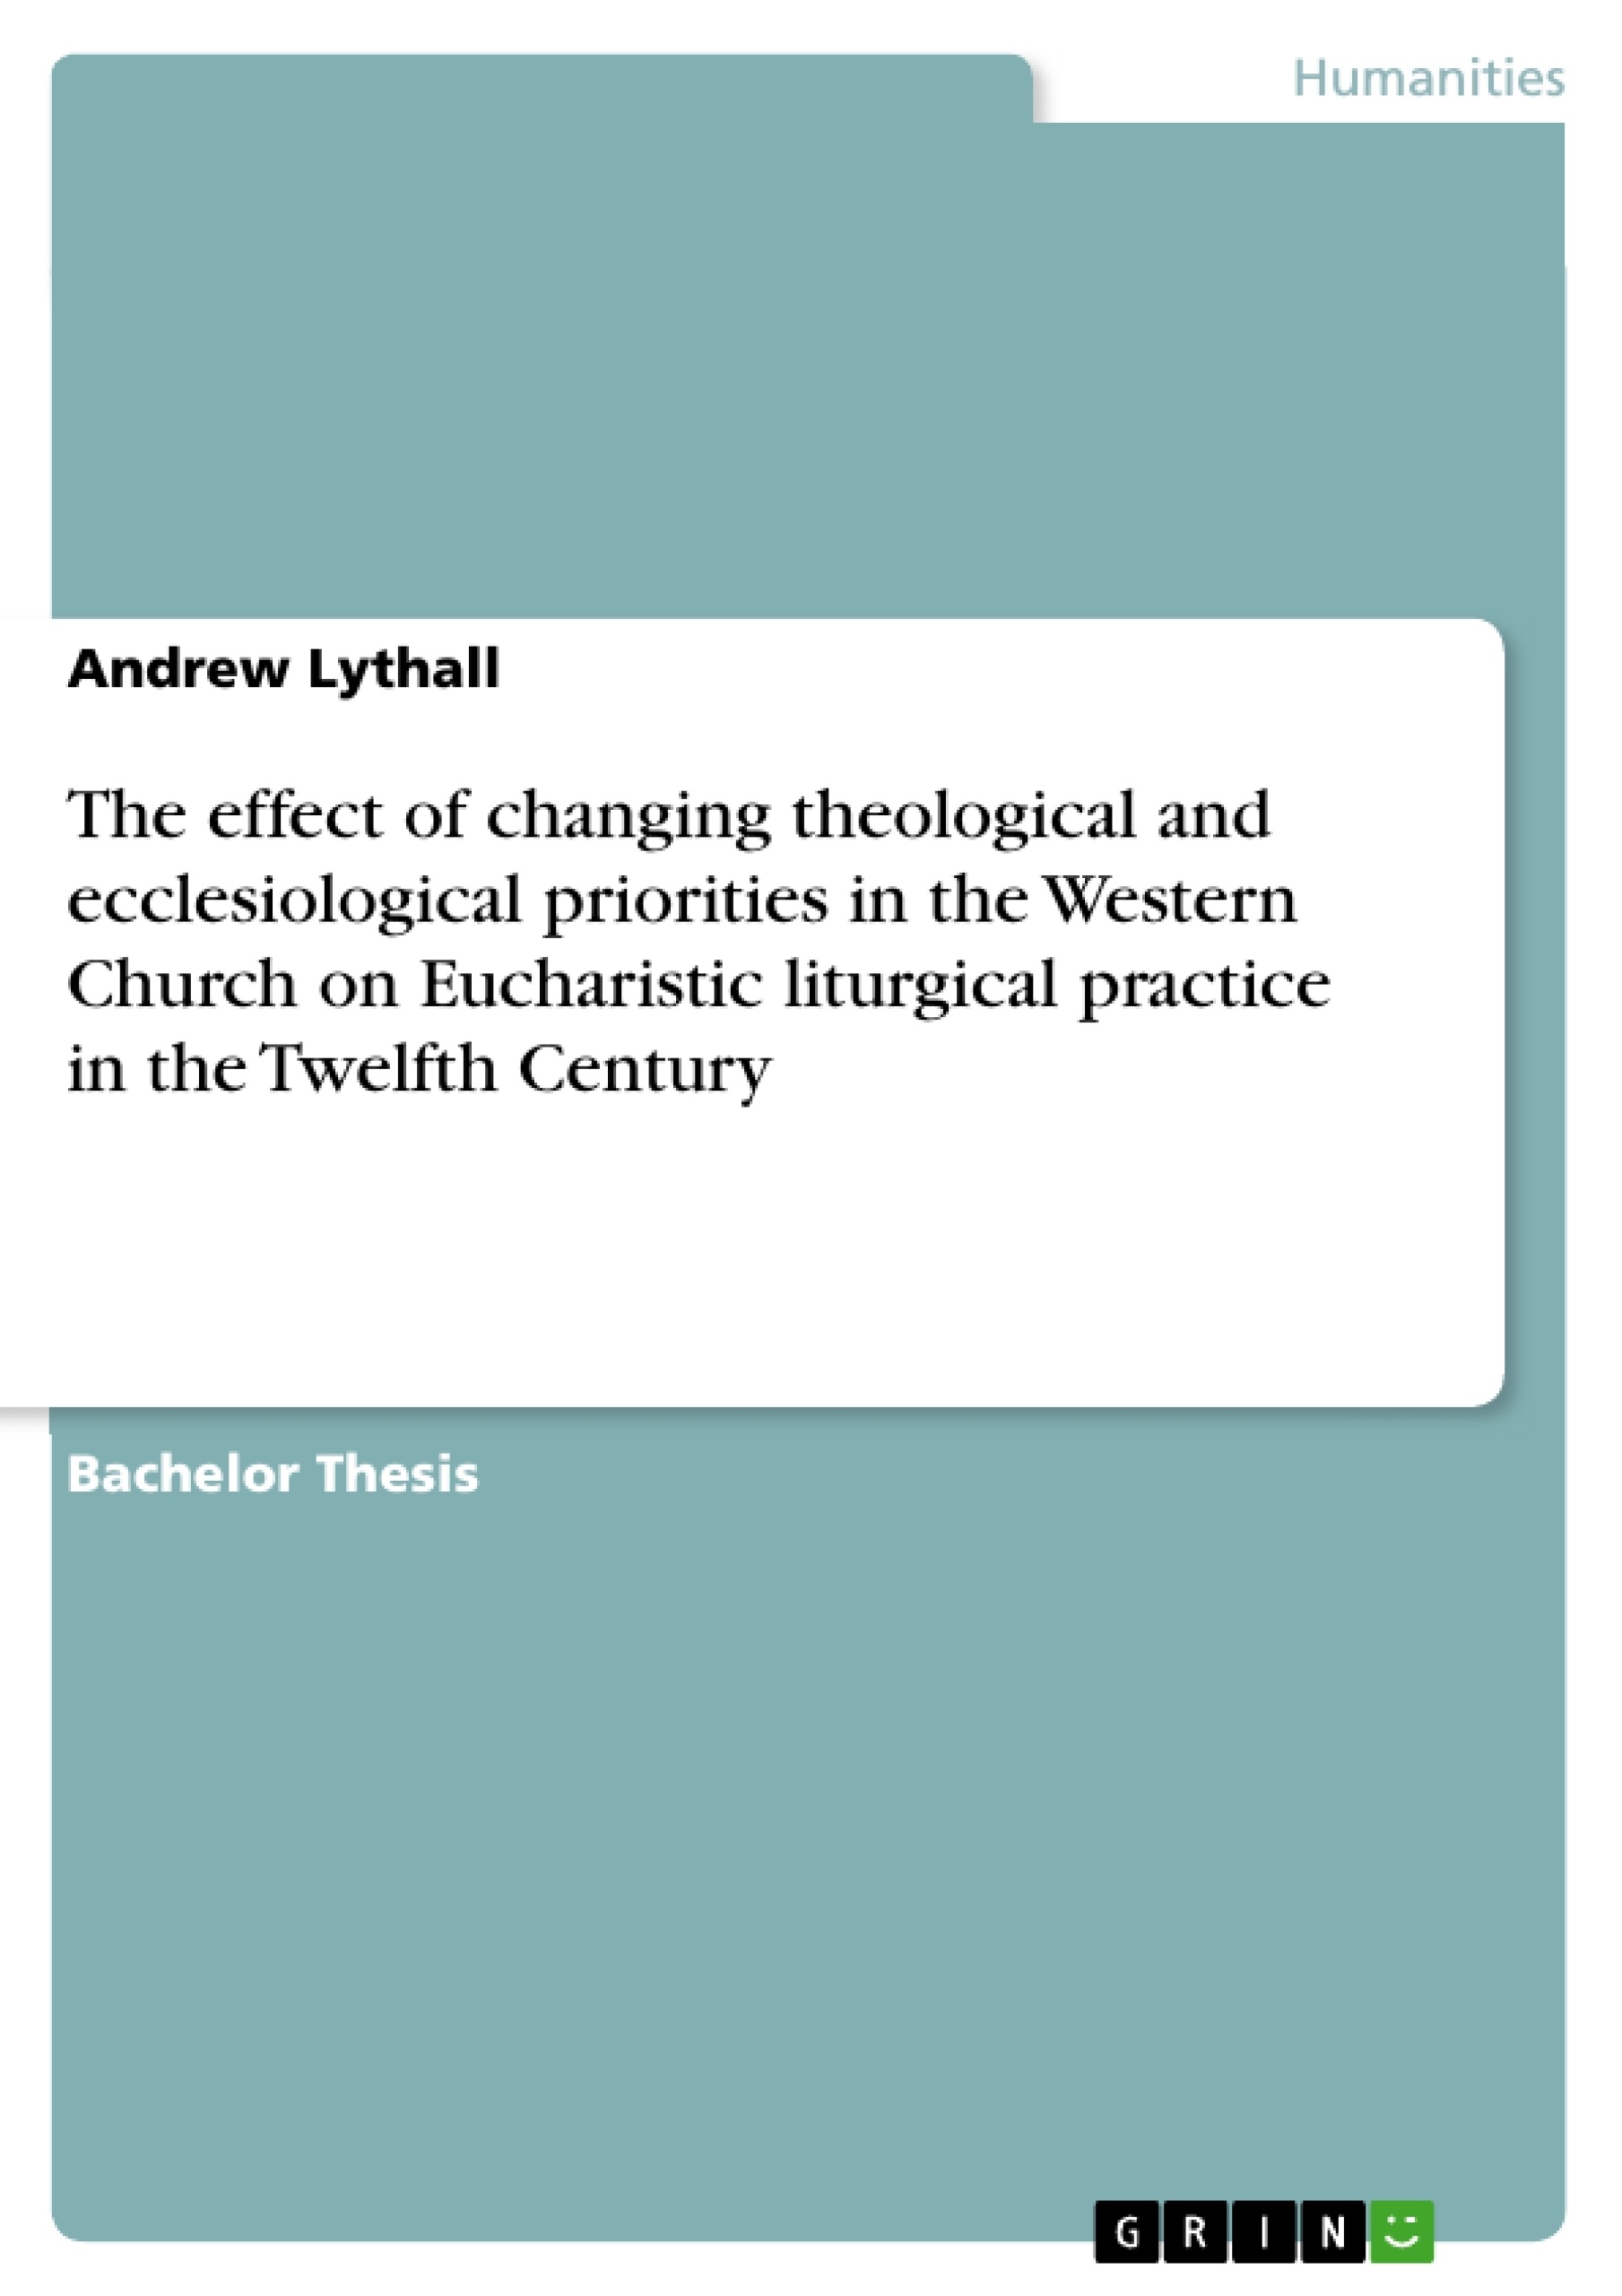 Titel: The effect of changing theological and ecclesiological priorities in the Western Church on Eucharistic liturgical practice in the Twelfth Century